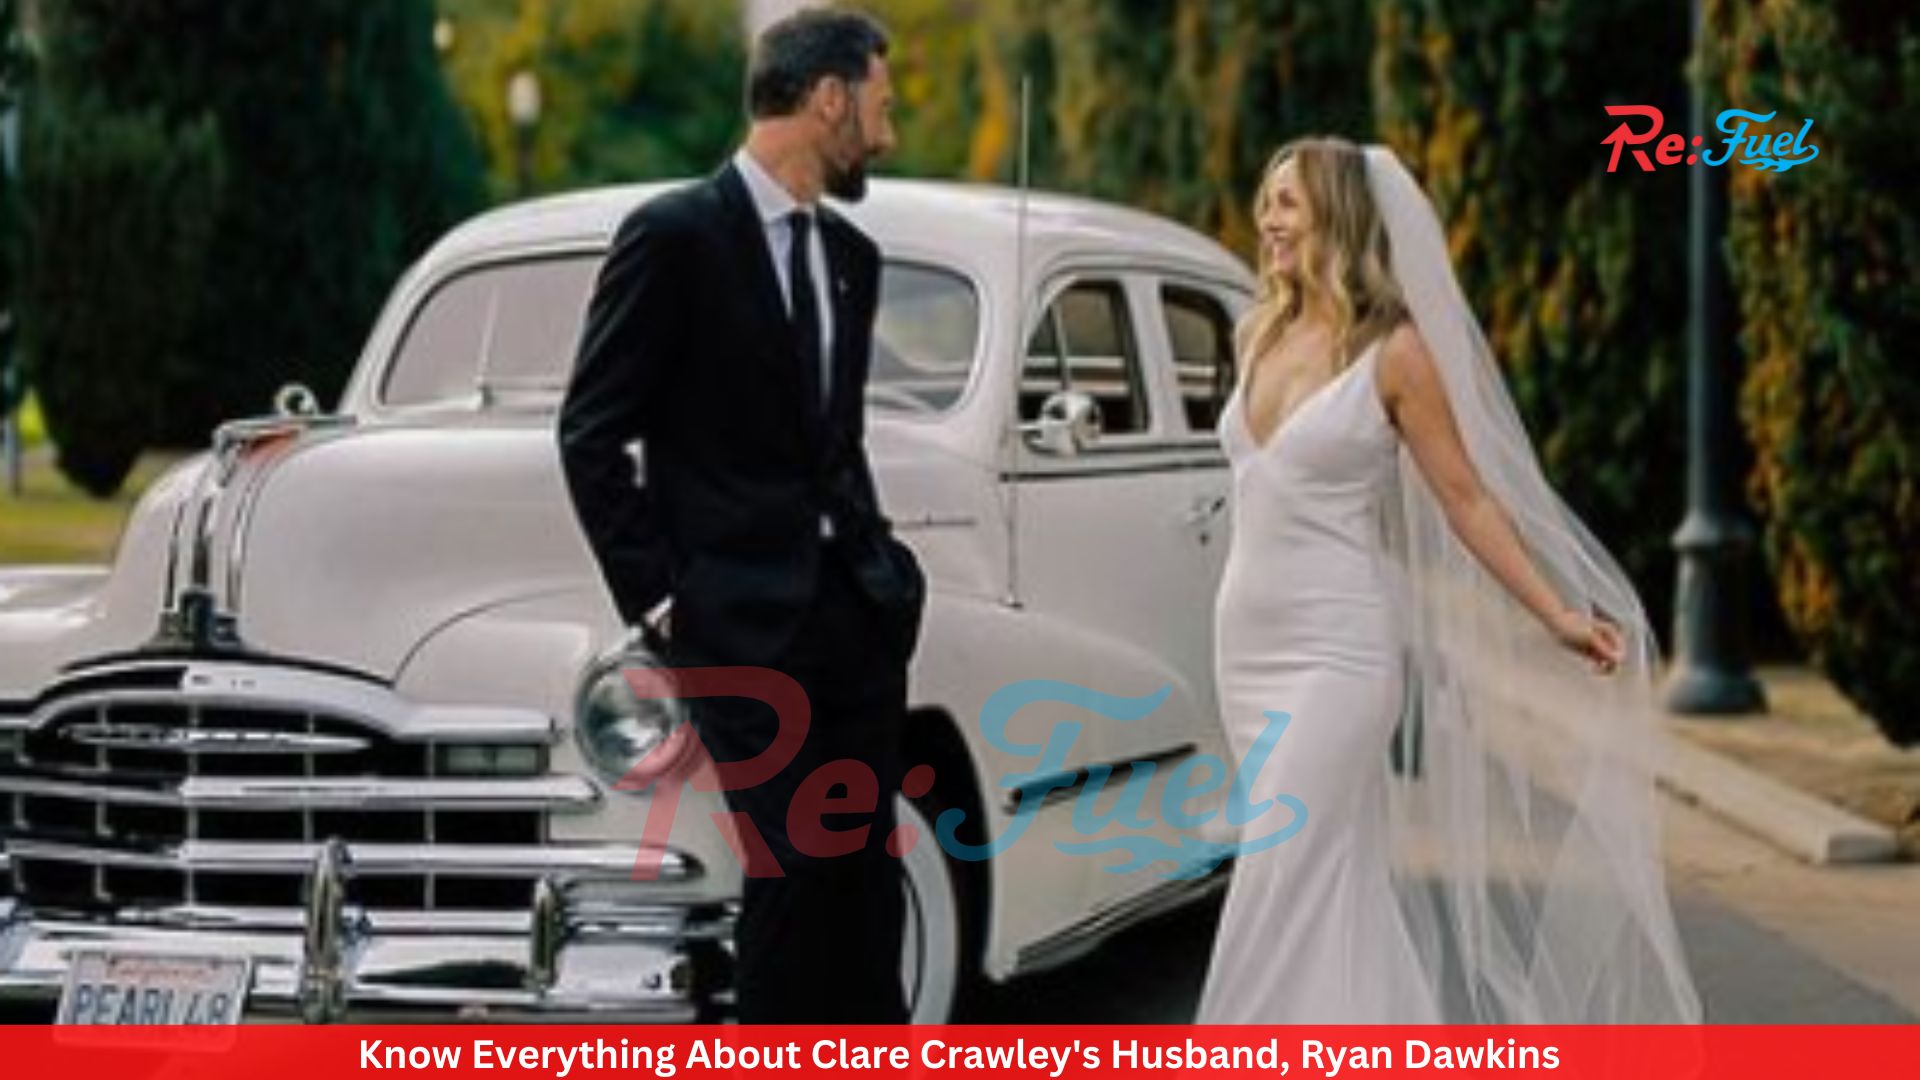 Know Everything About Clare Crawley's Husband, Ryan Dawkins